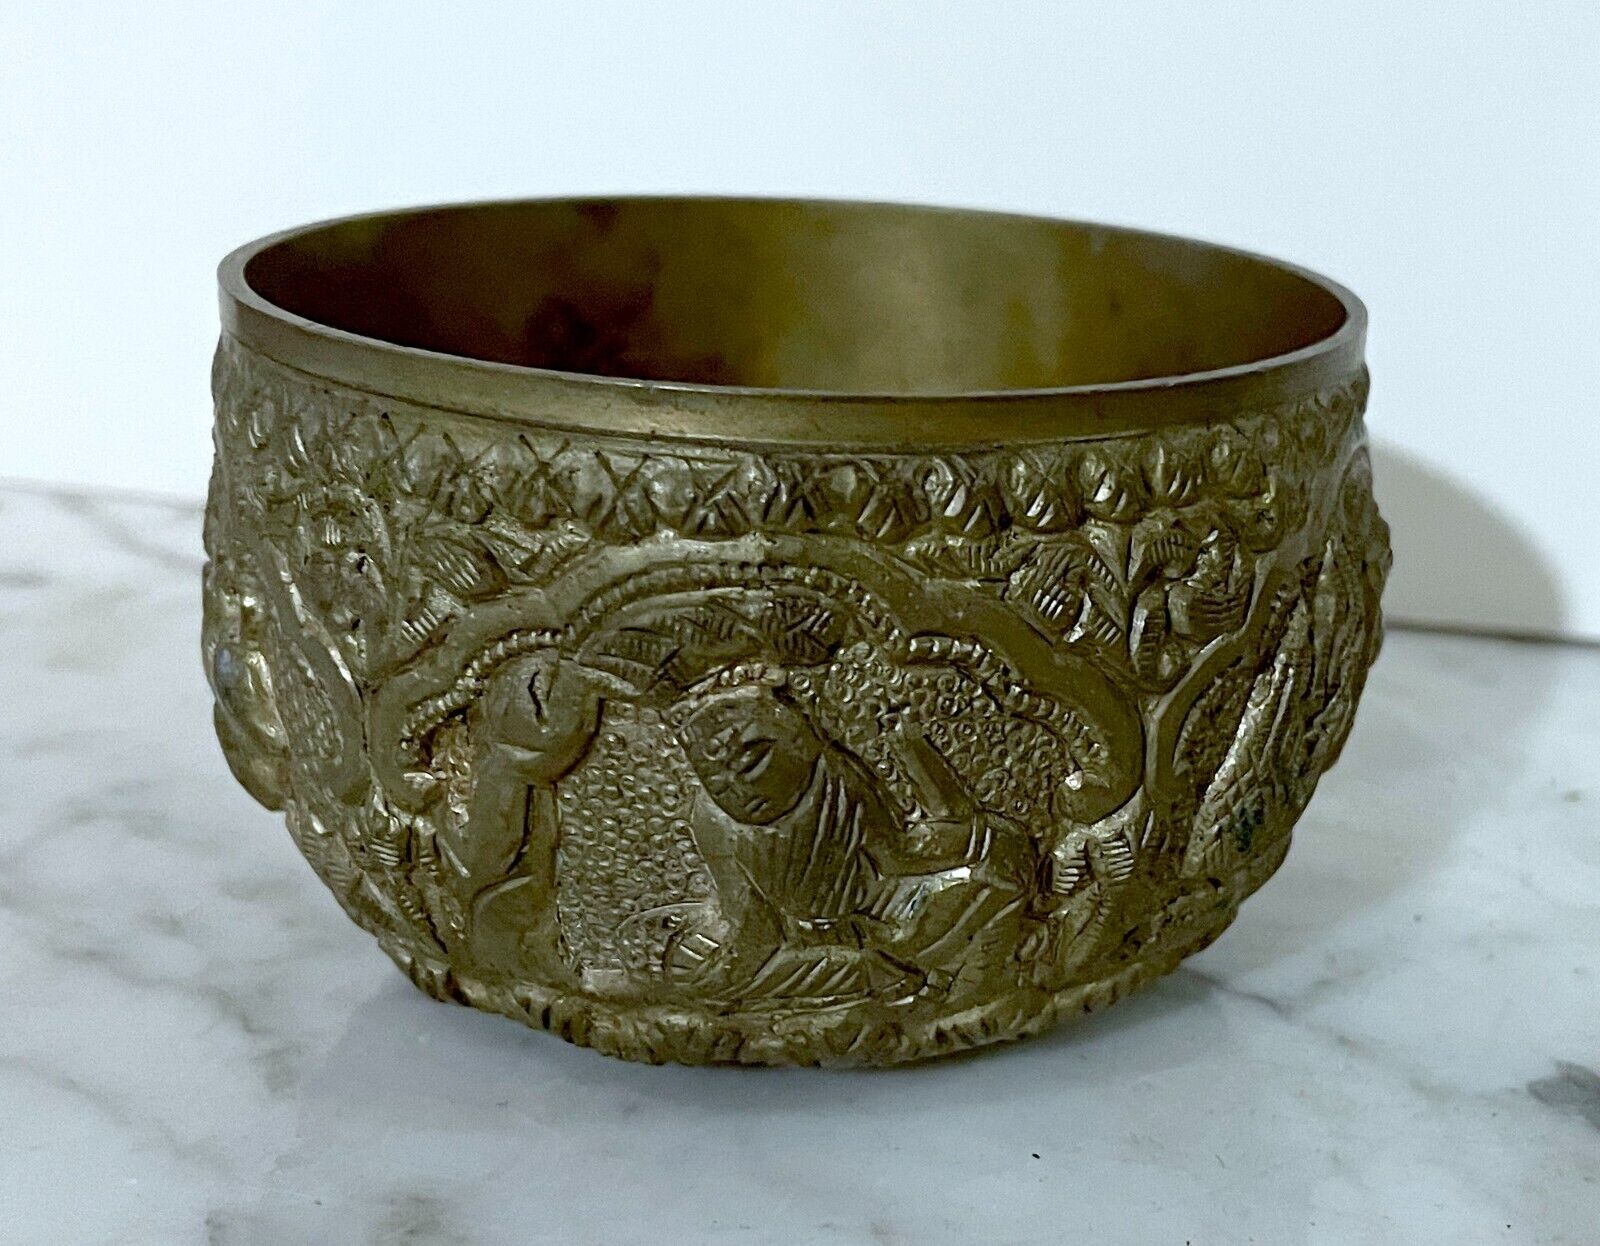 GORGEOUS OLD VINTAGE CHINESE SOLID BRASS BUDDHIST TEMPLE OFFERING BOWL